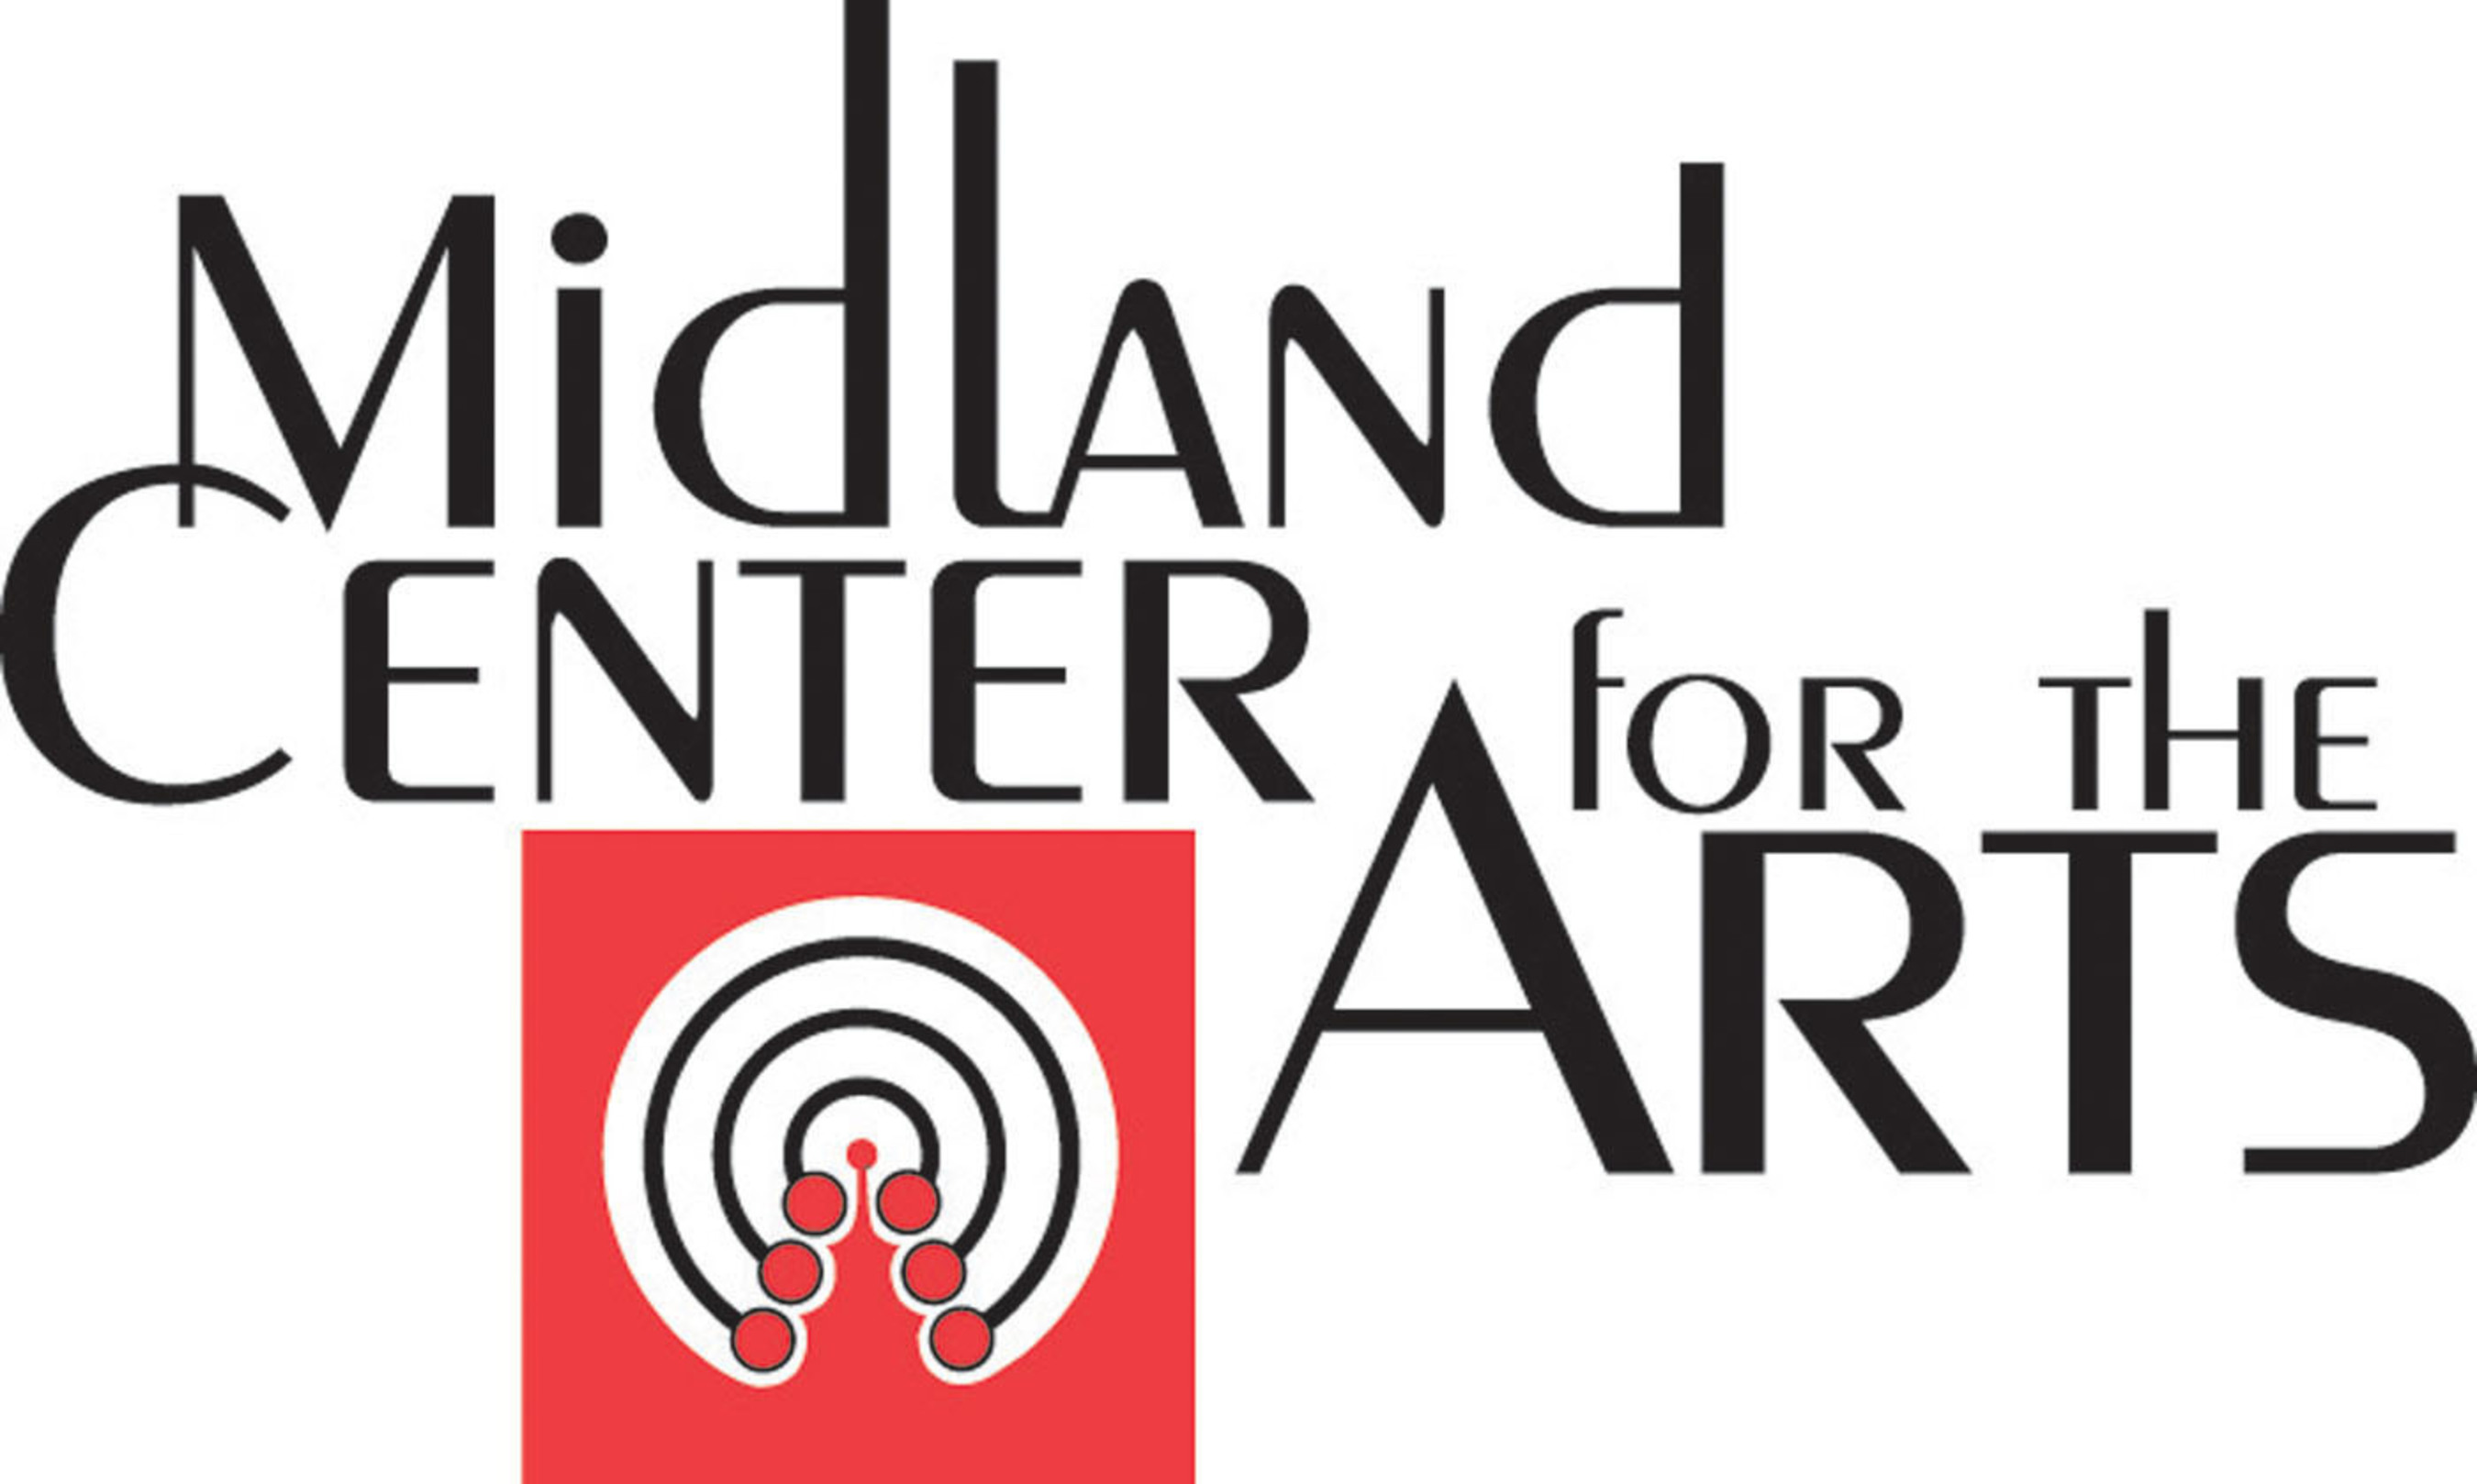 Escape the Ordinary at Midland Center for the Arts. (PRNewsFoto/Midland Center for the Arts)